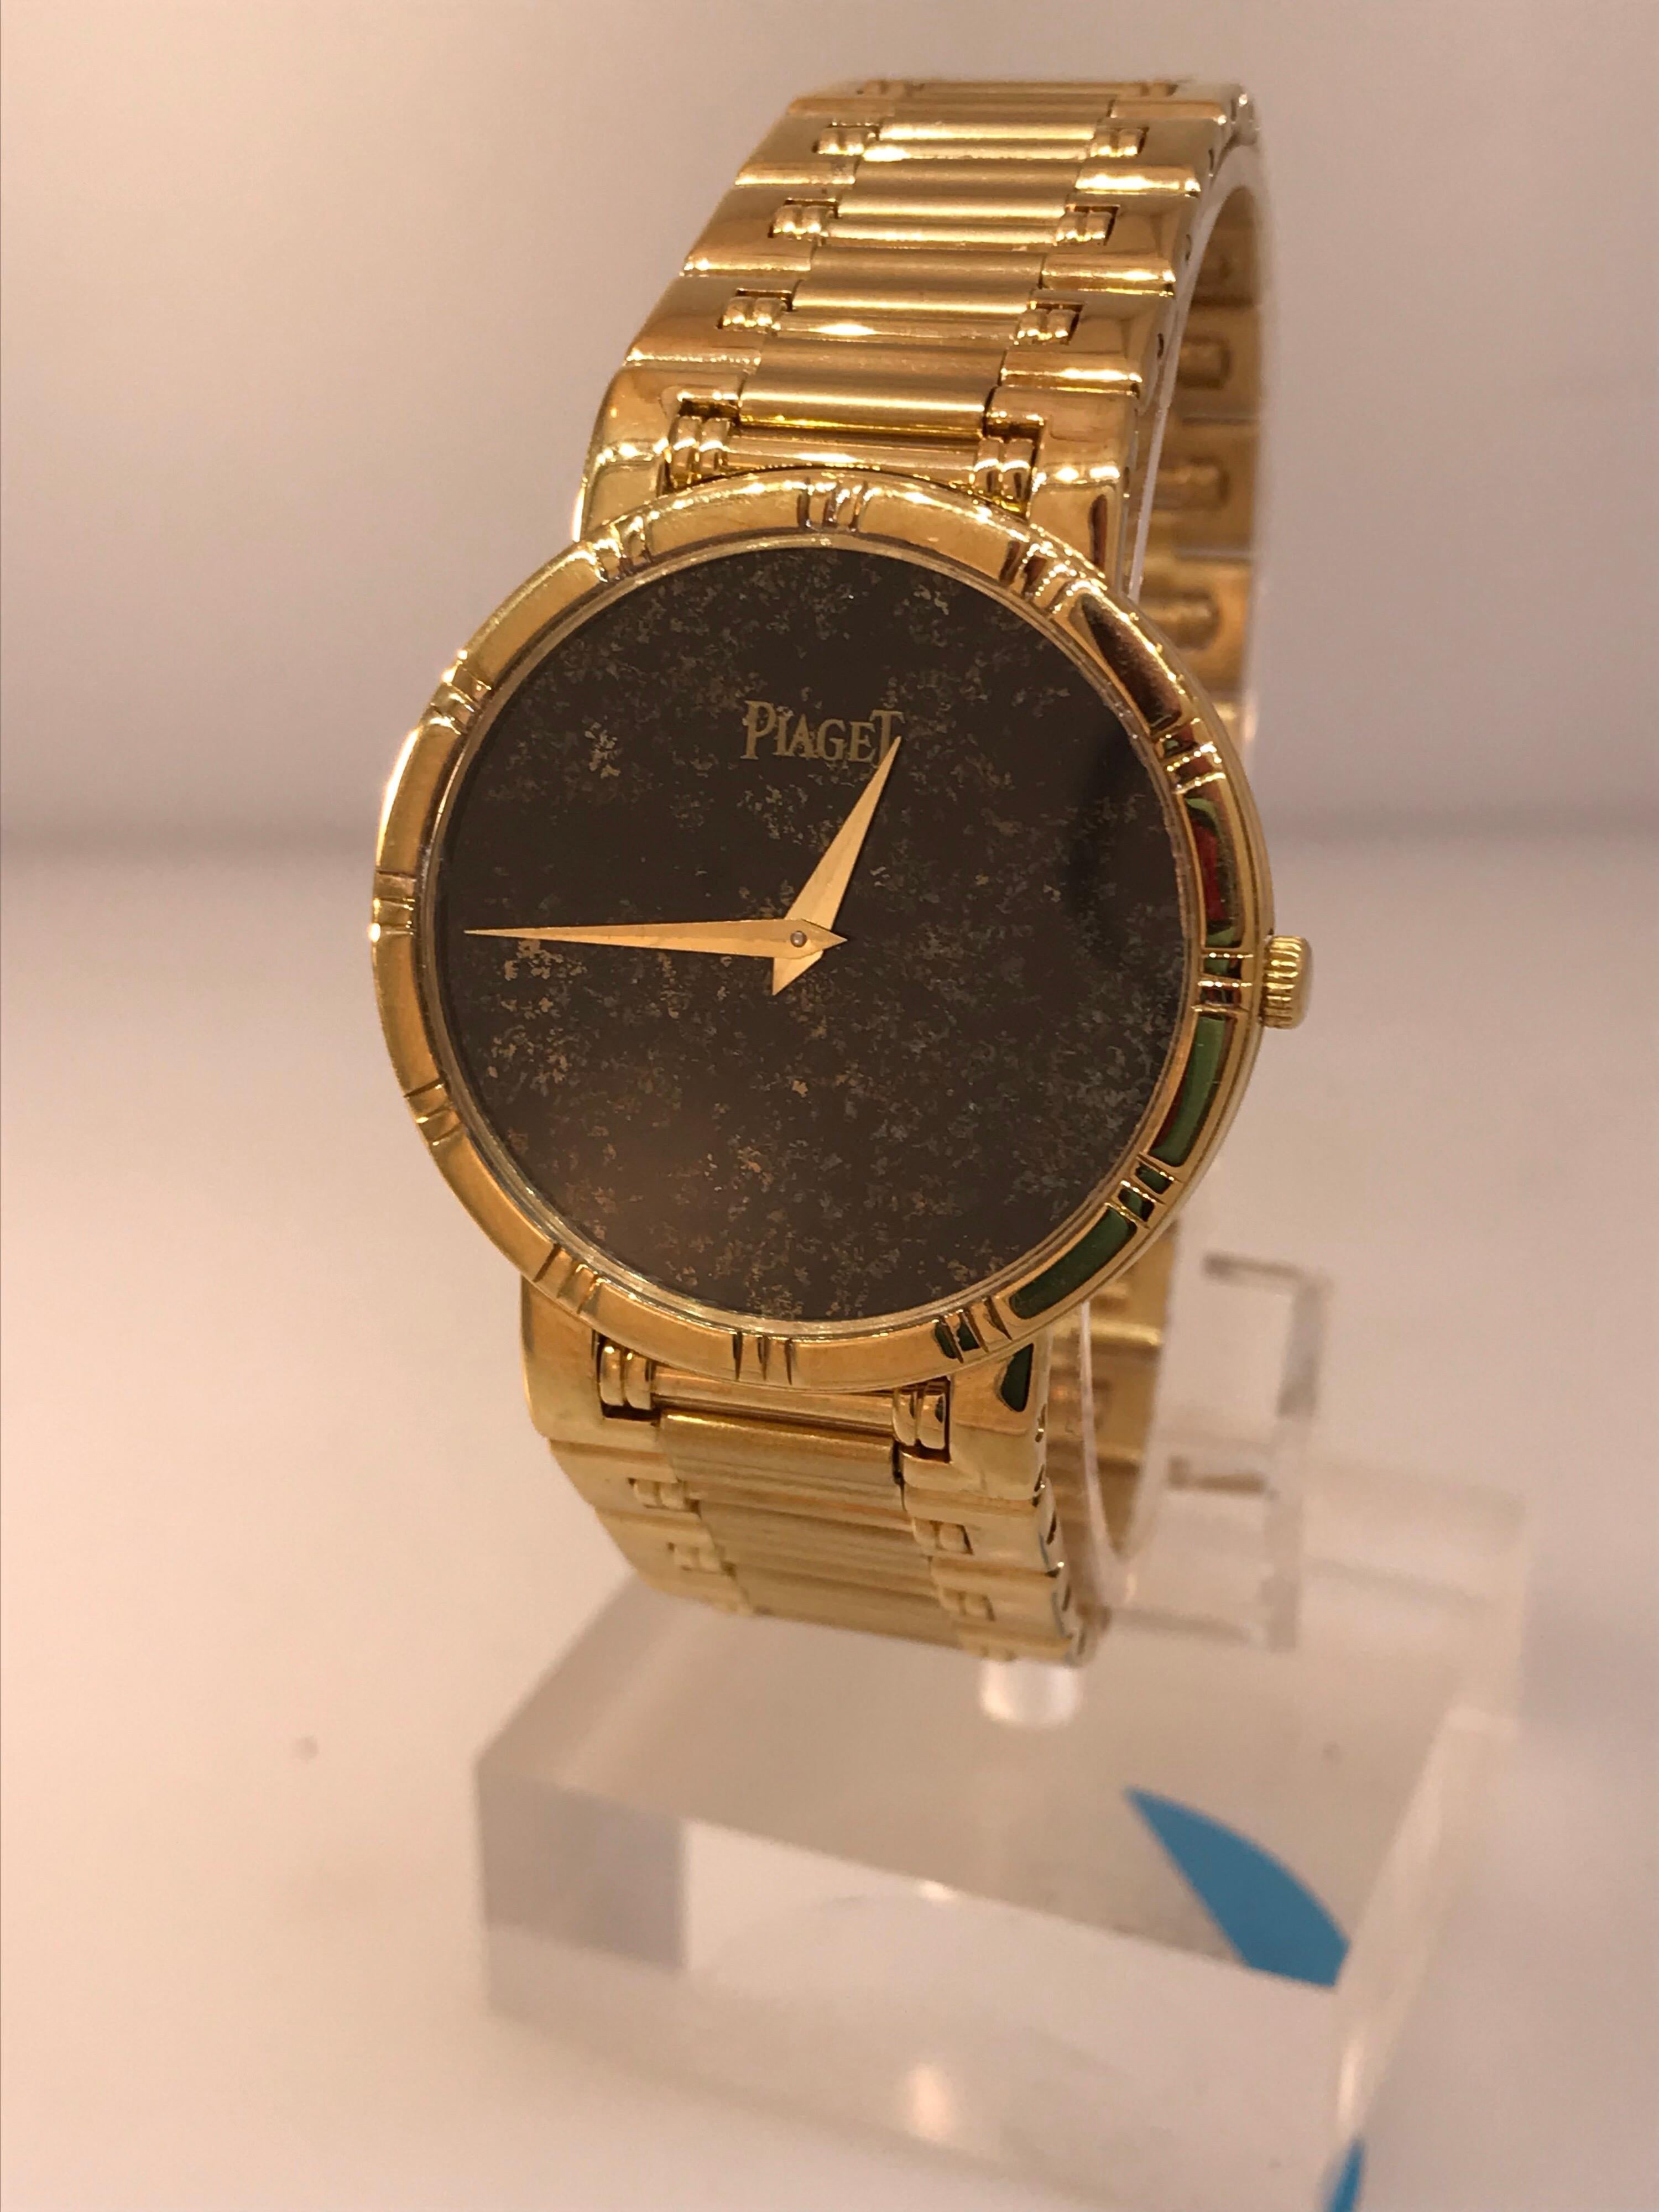 Piaget Dancer 18 Karat Yellow Gold Onyx Dial Men's Bracelet Watch 84023 K81 In Excellent Condition For Sale In New York, NY